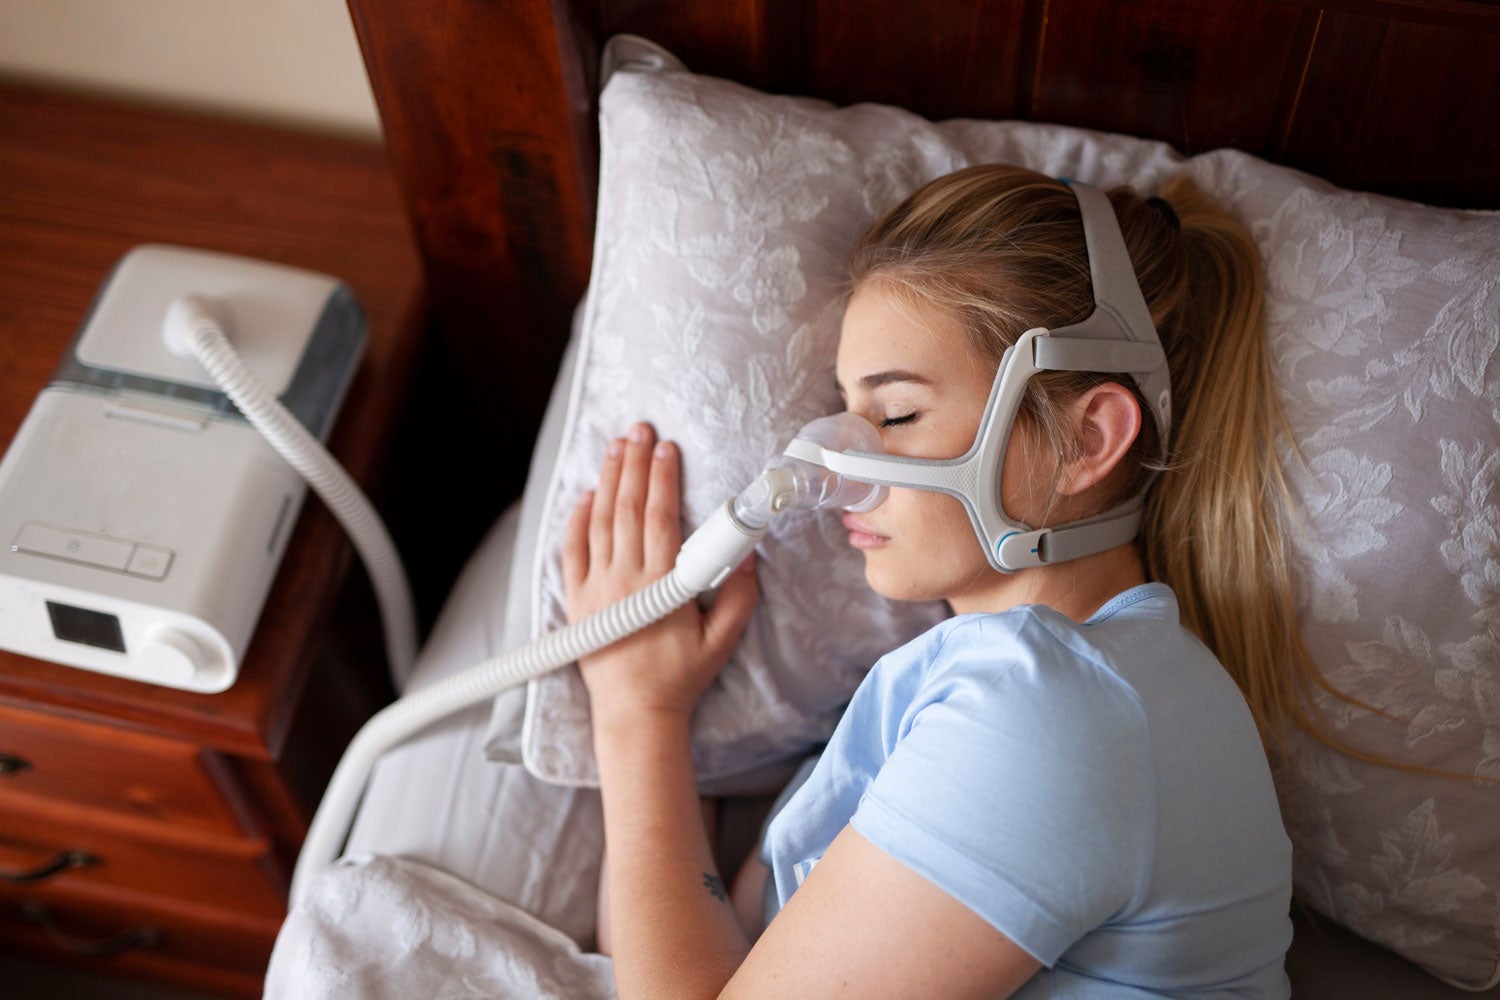 Three Things to Keep in Mind Before You File a Philips CPAP Lawsuit